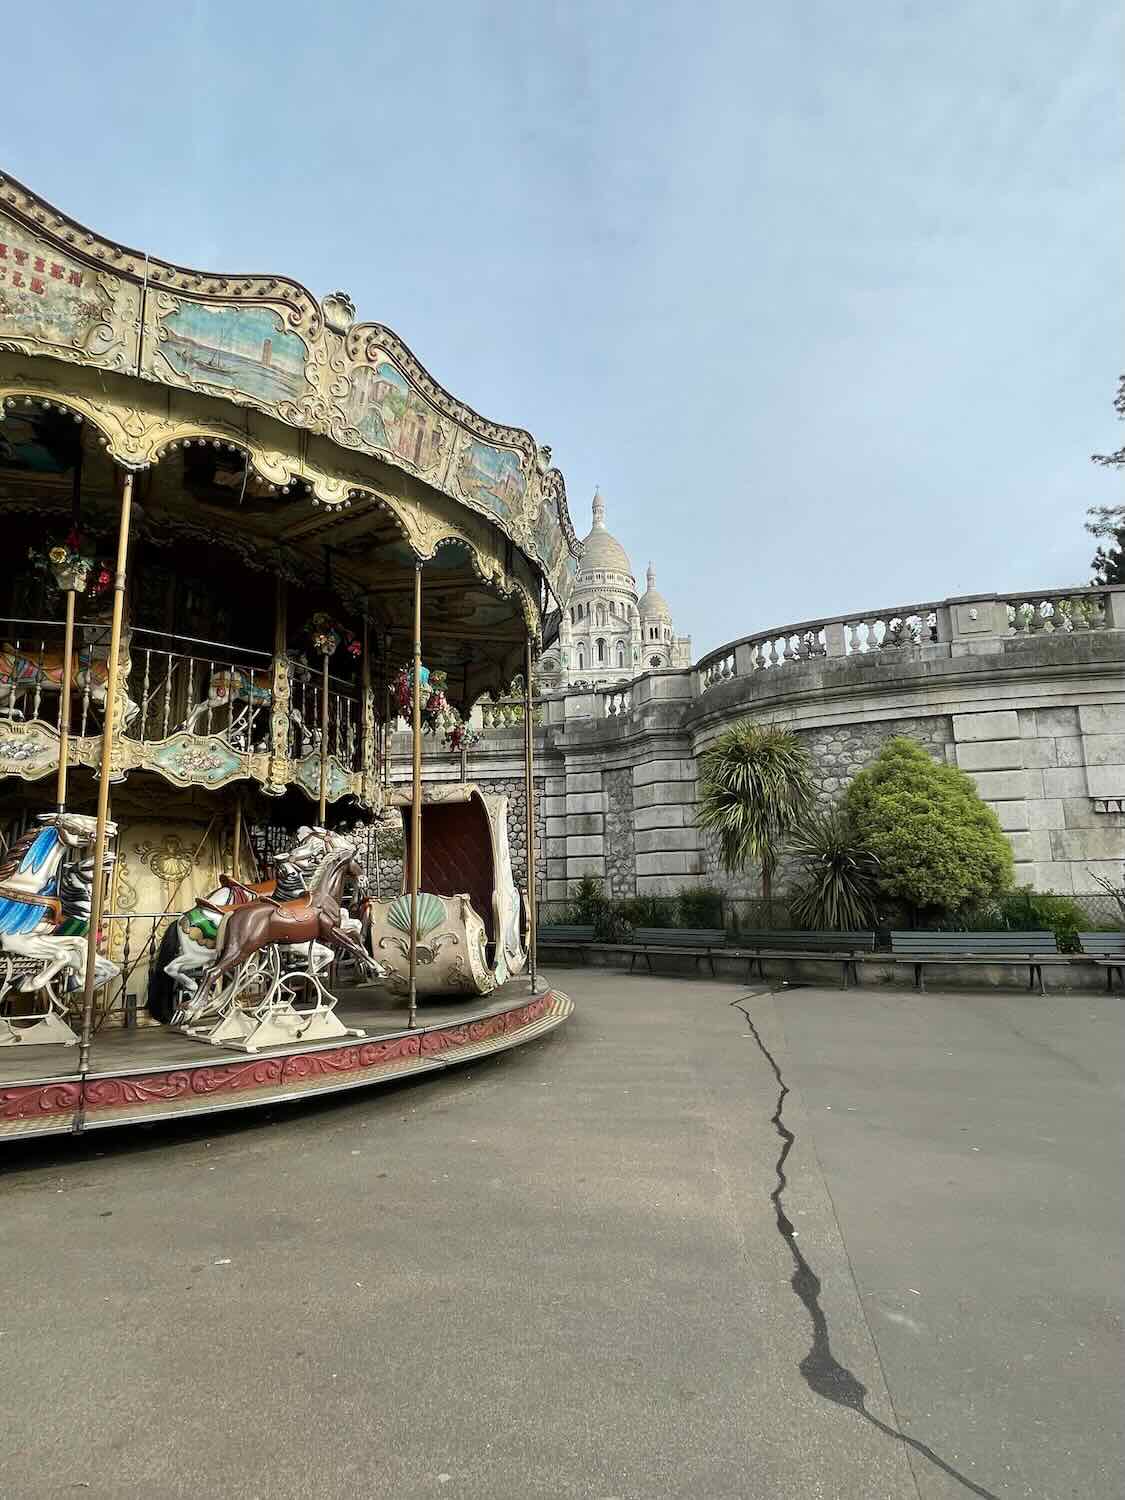 The image features a charming old carousel with intricate designs and classic painted horses, located near the base of the Sacré-Cœur Basilica in Montmartre, Paris. The scene is picturesque, blending the whimsical nature of the carousel with the grandeur of the historic basilica in the background, under a slightly cloudy sky.